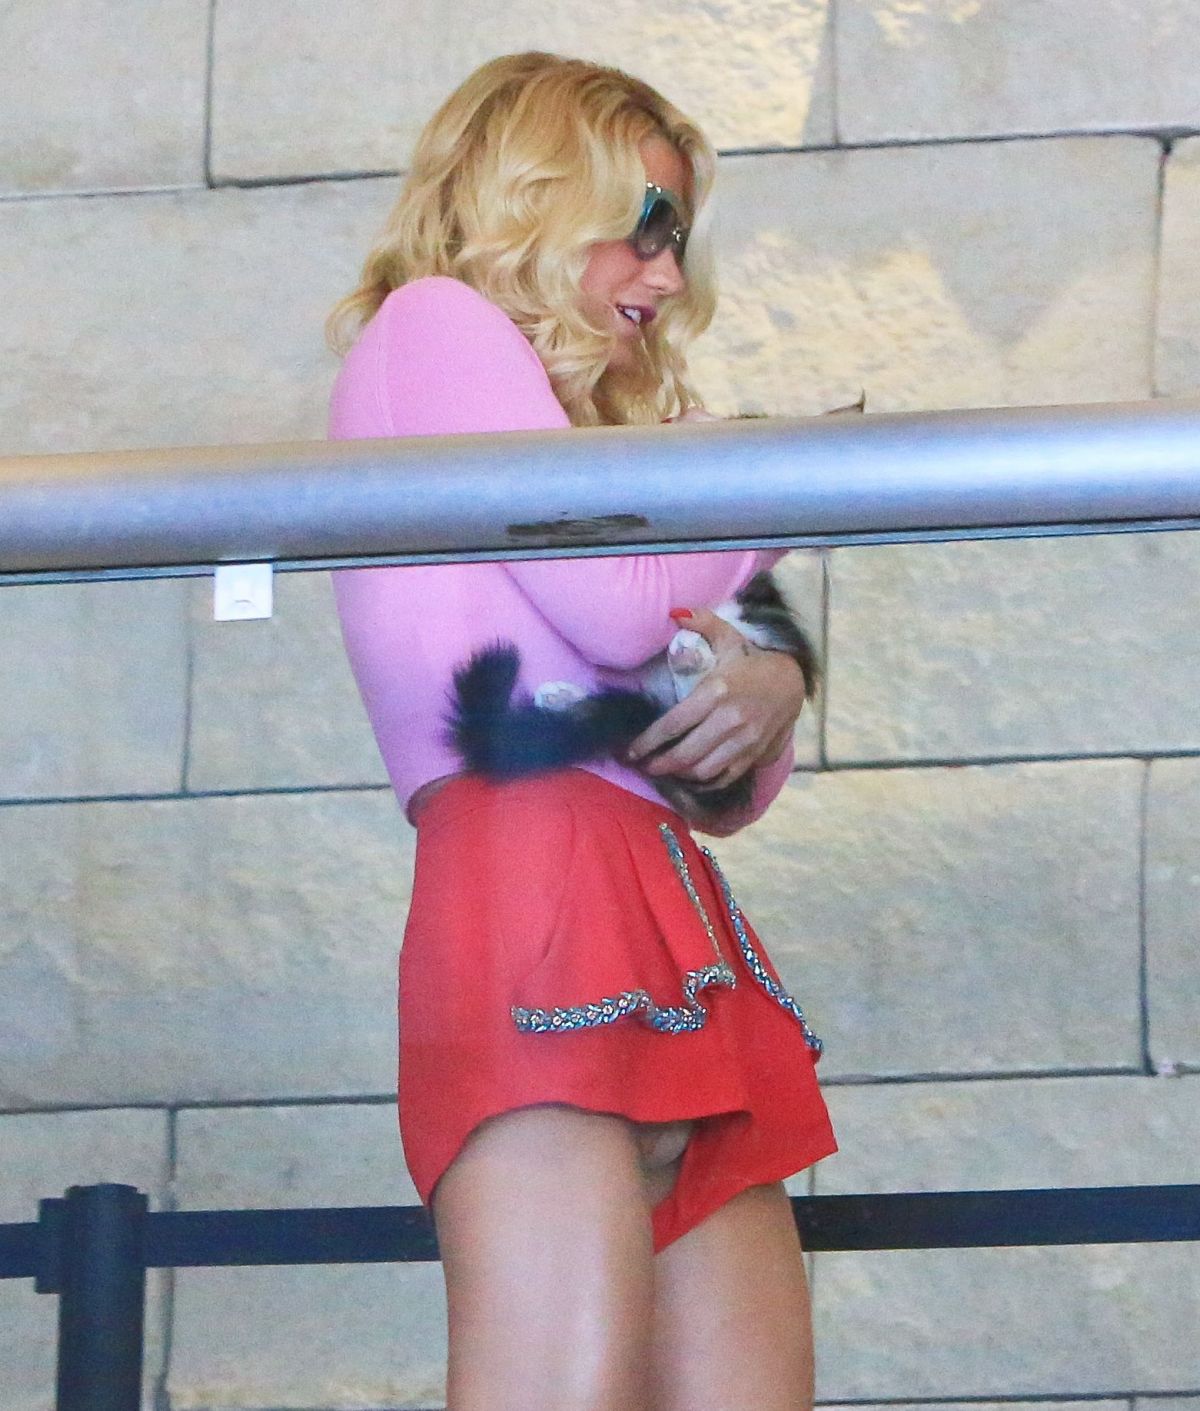 KESHA in Shorts at LAX Airport in Los Angeles.